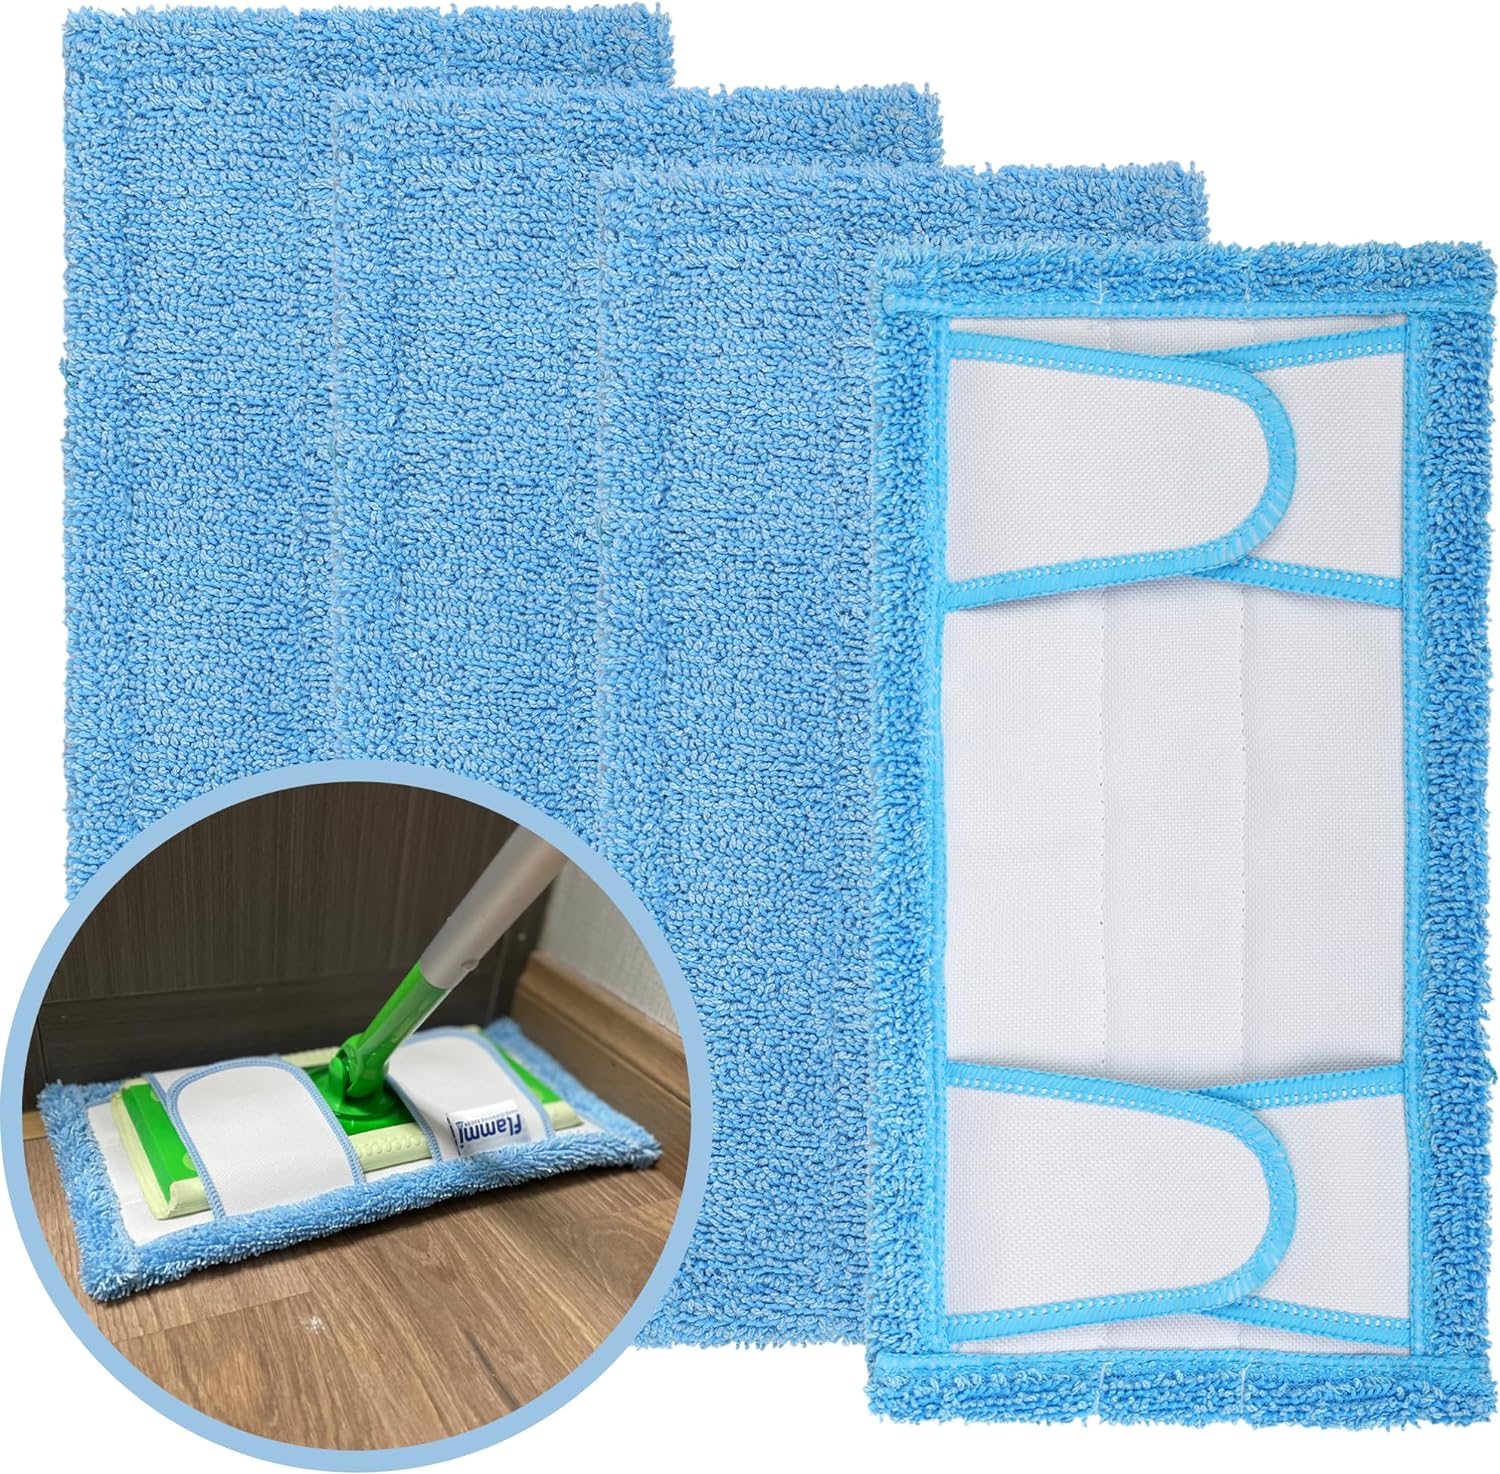 Reusable Mop Pad (UP to 100X) for Swiffer Sweeper Mop